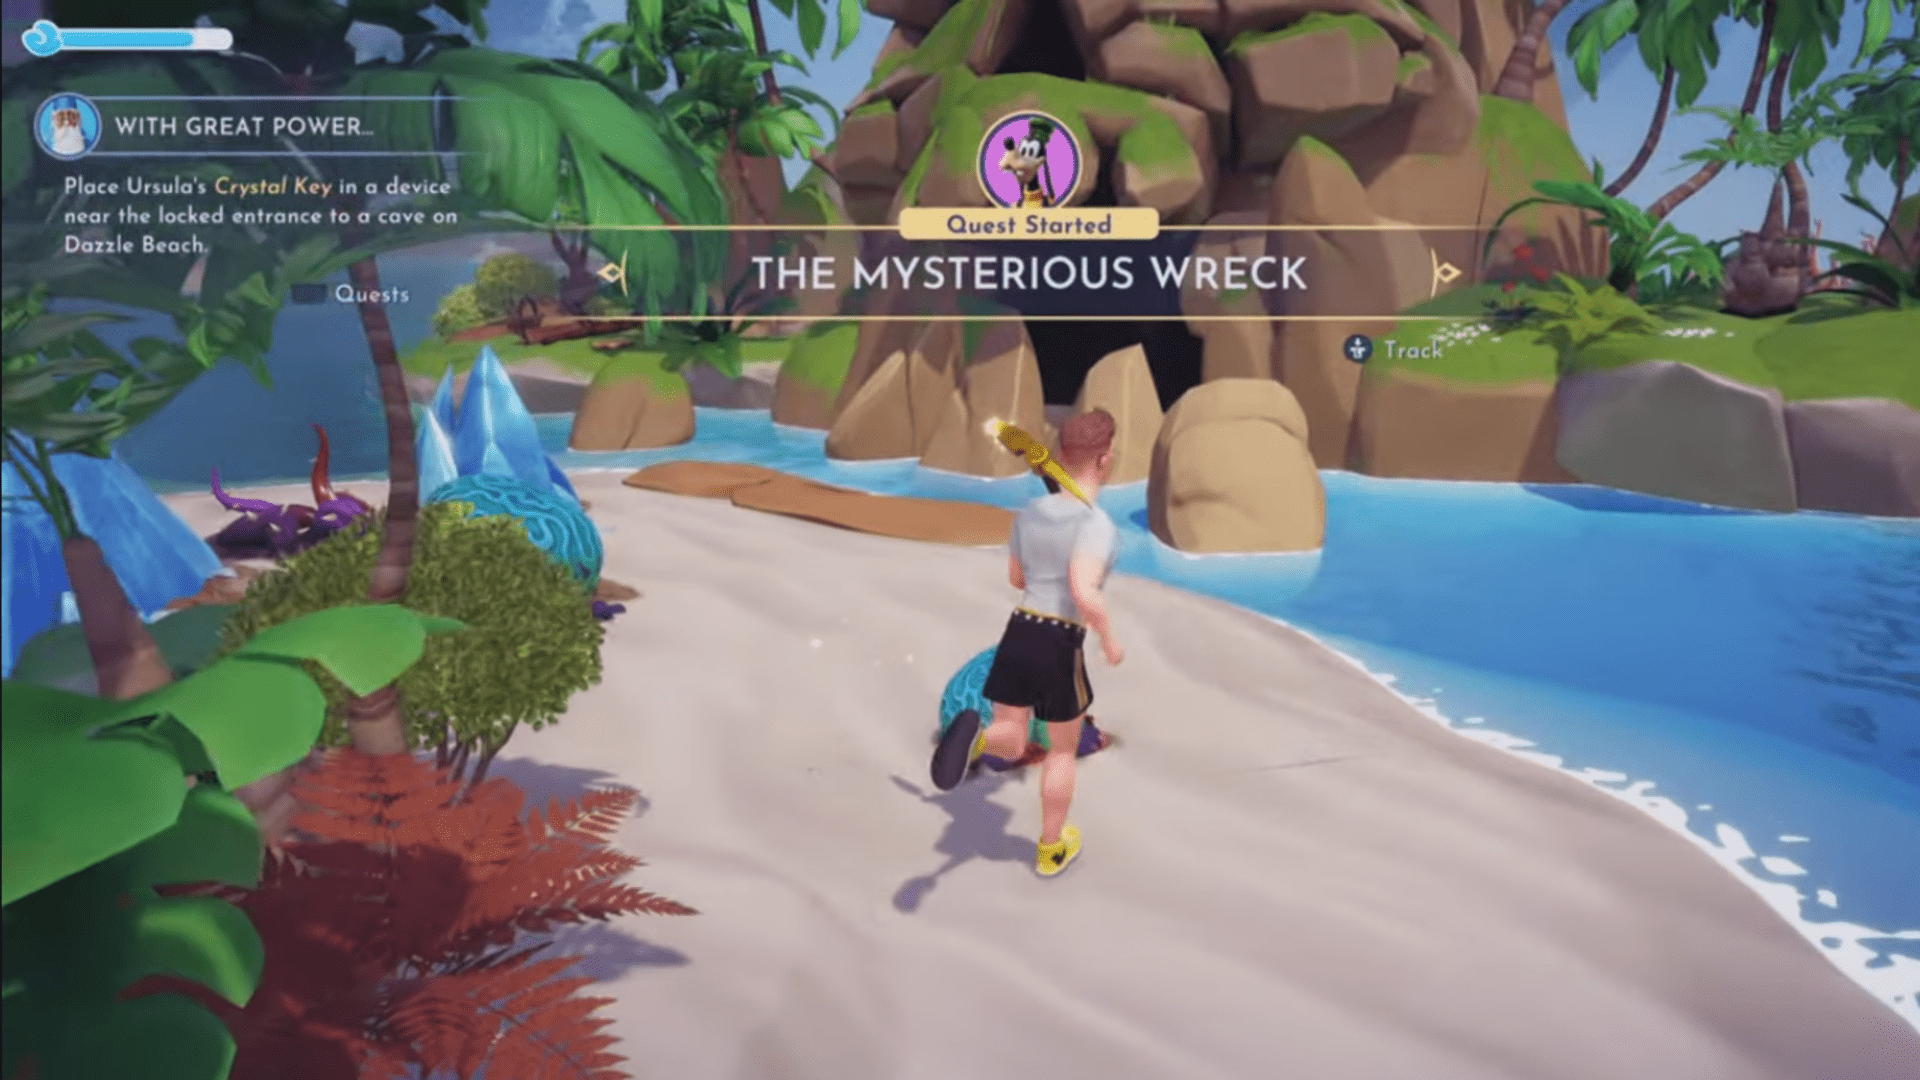 How to complete The Mysterious Wreck in Disney Dreamlight Valley